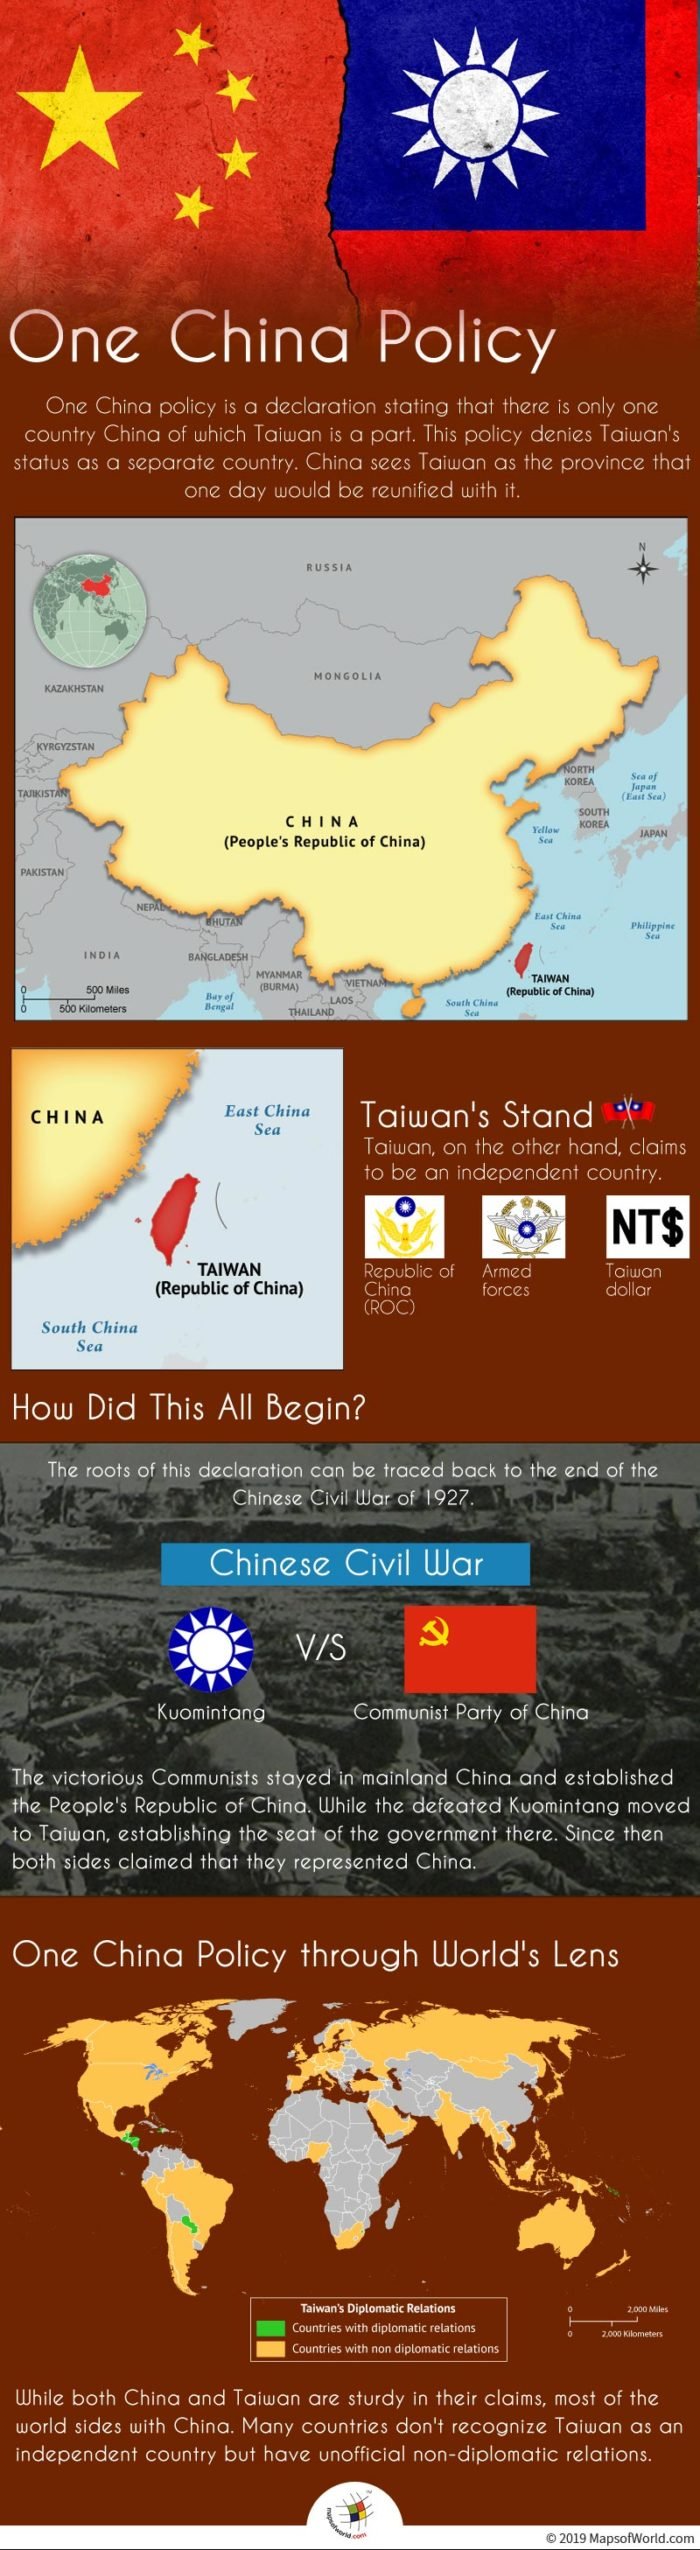 Infographic Showing Details of One China Policy